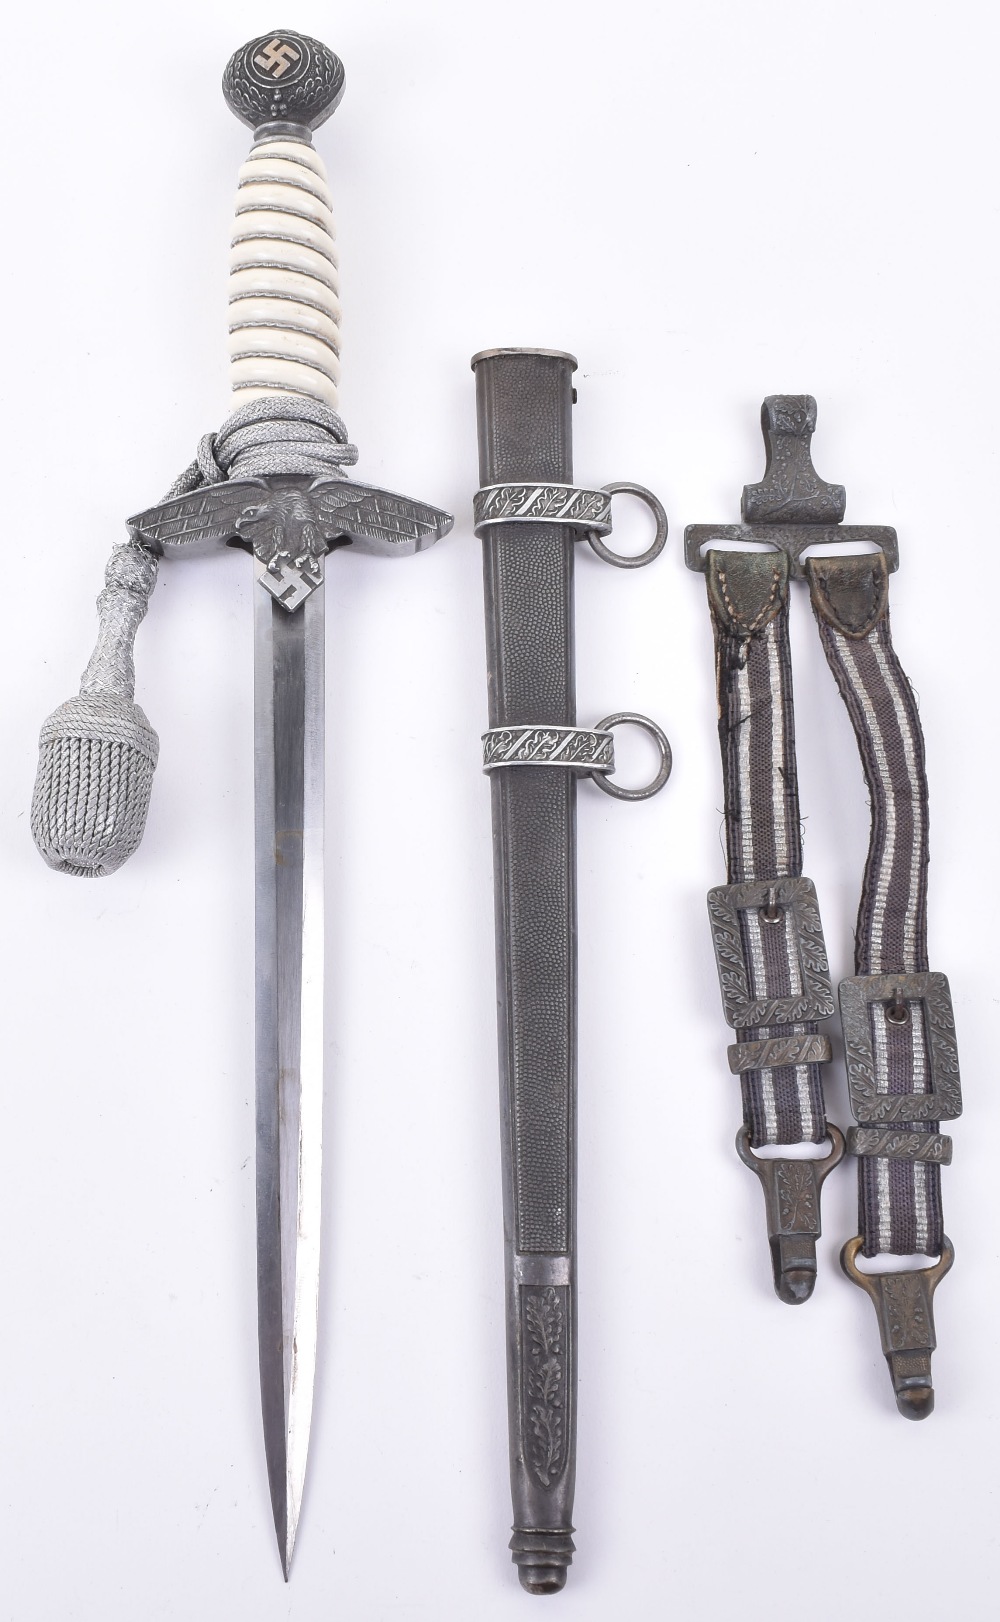 Luftwaffe 2nd Pattern Dress Dagger with Hanging Straps and Portepee by F W Holler